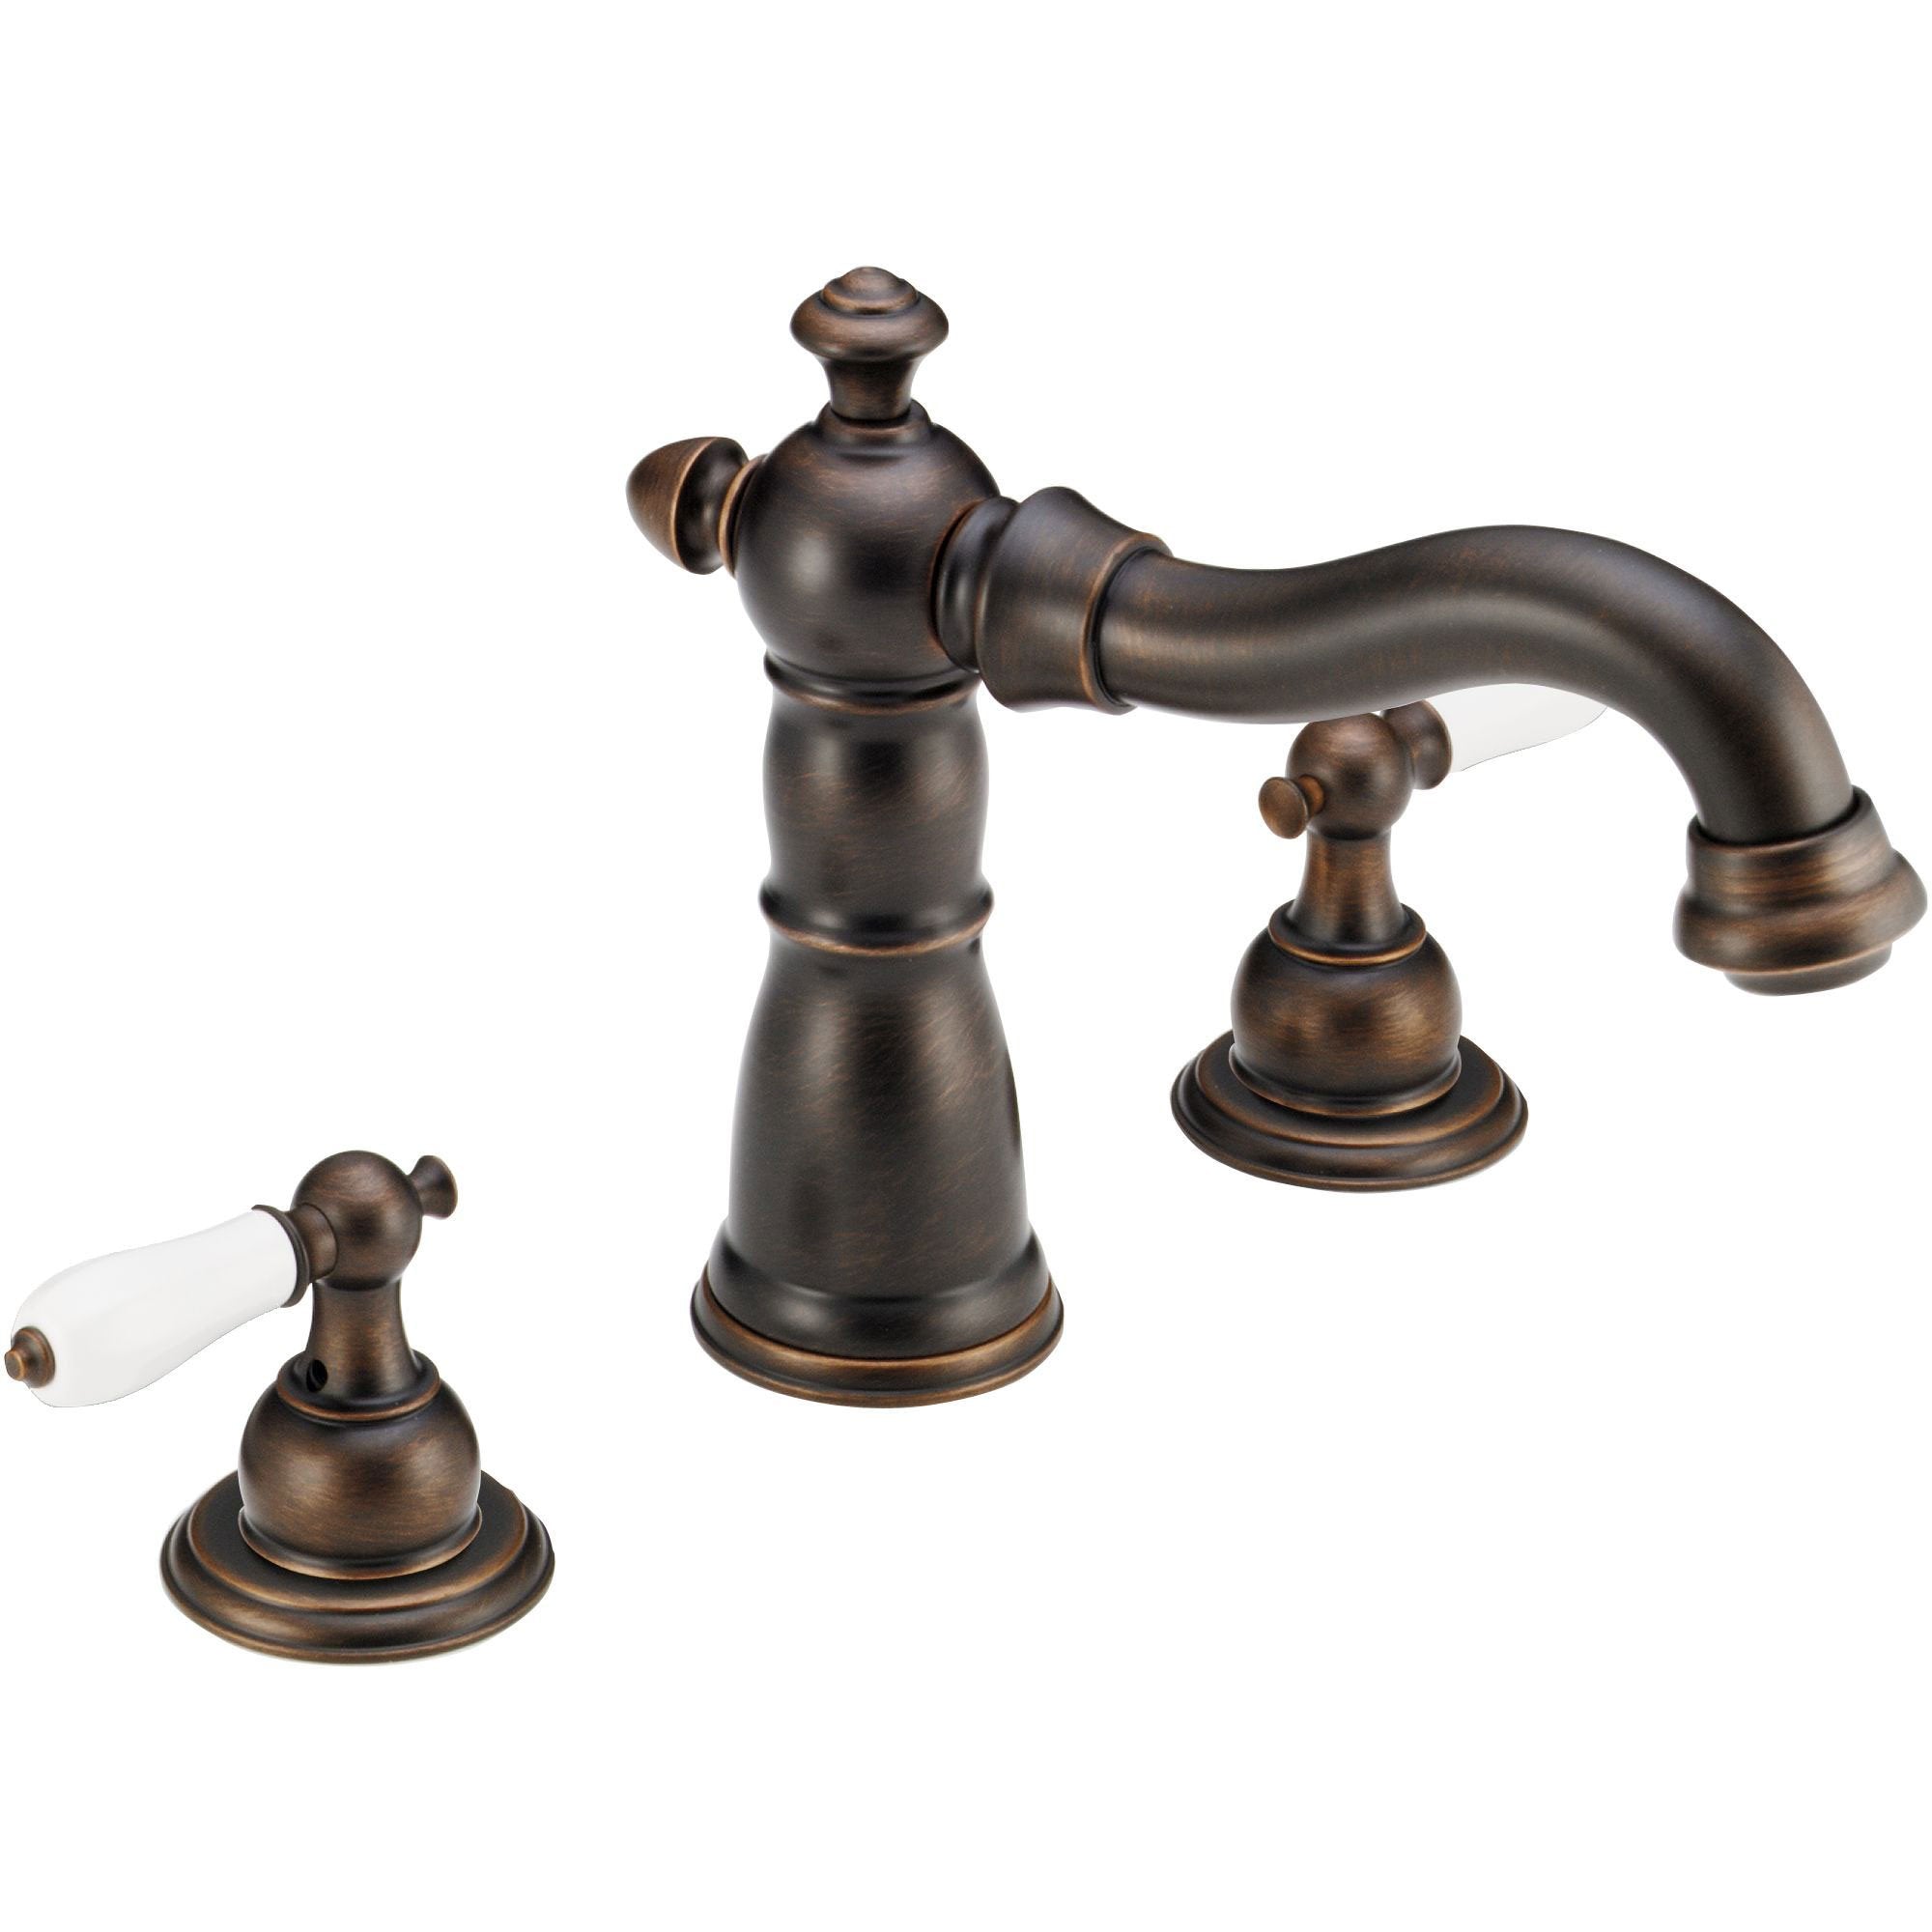 Delta Traditional Victorian Venetian Bronze 3-Hole Roman Tub Filler Faucet INCLUDES Valve and White Lever Handles D1095V